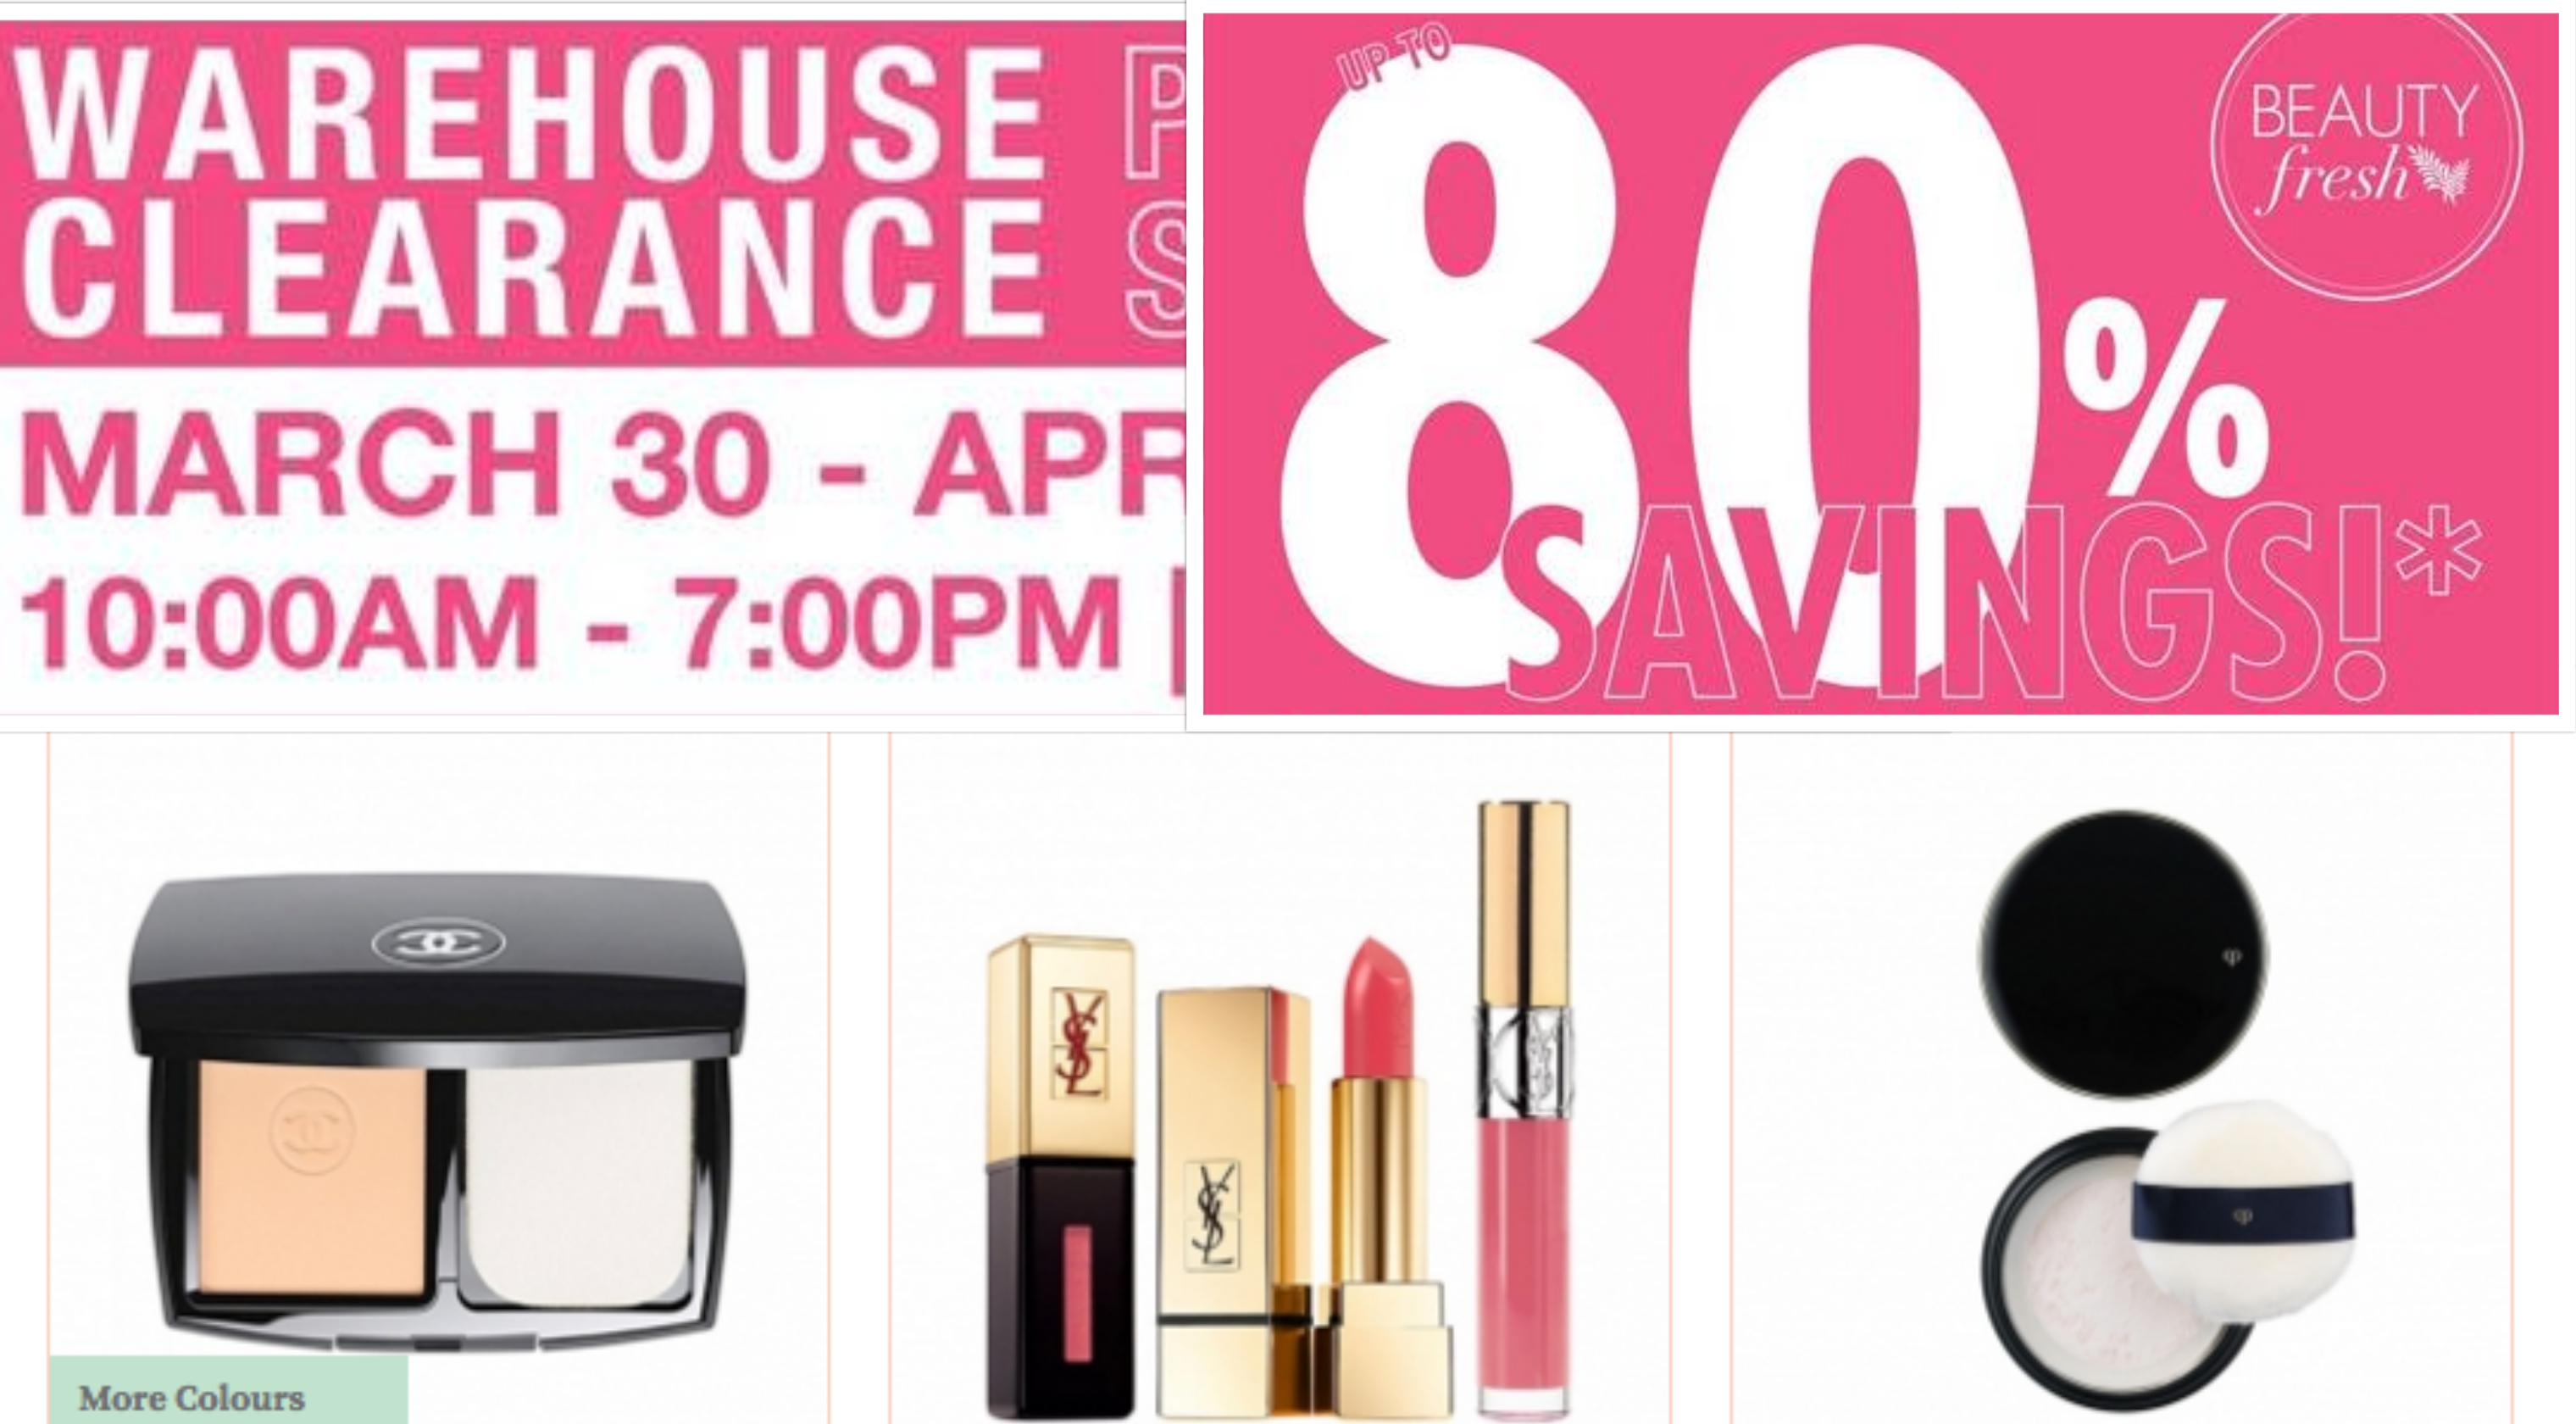 Beauty warehouse sale: up to 80 percent off Chanel, , NARS, and more -   - News from Singapore, Asia and around the world